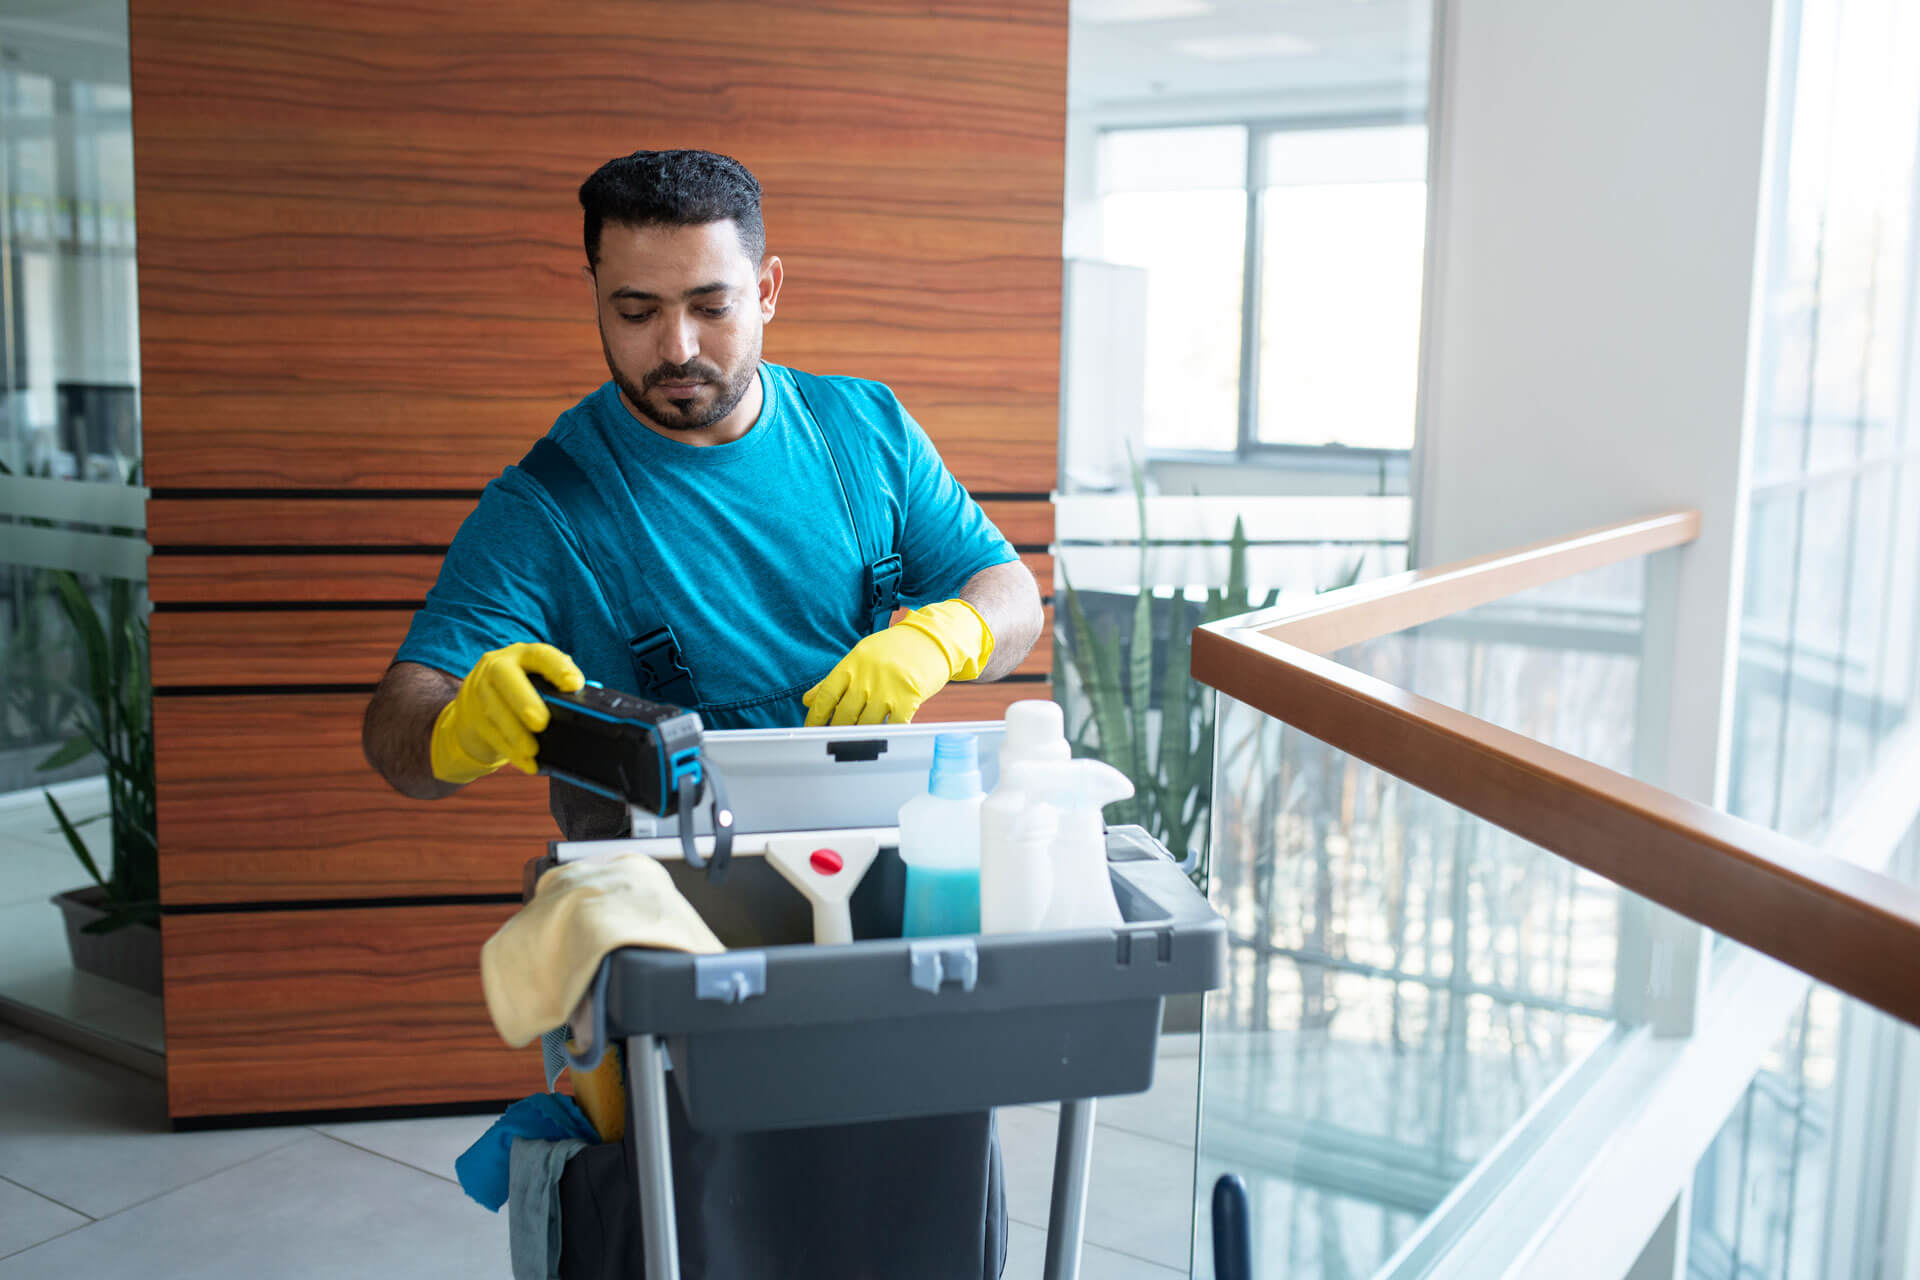 A maid providing cleaning service in an office located in Fort Worth, Texas.